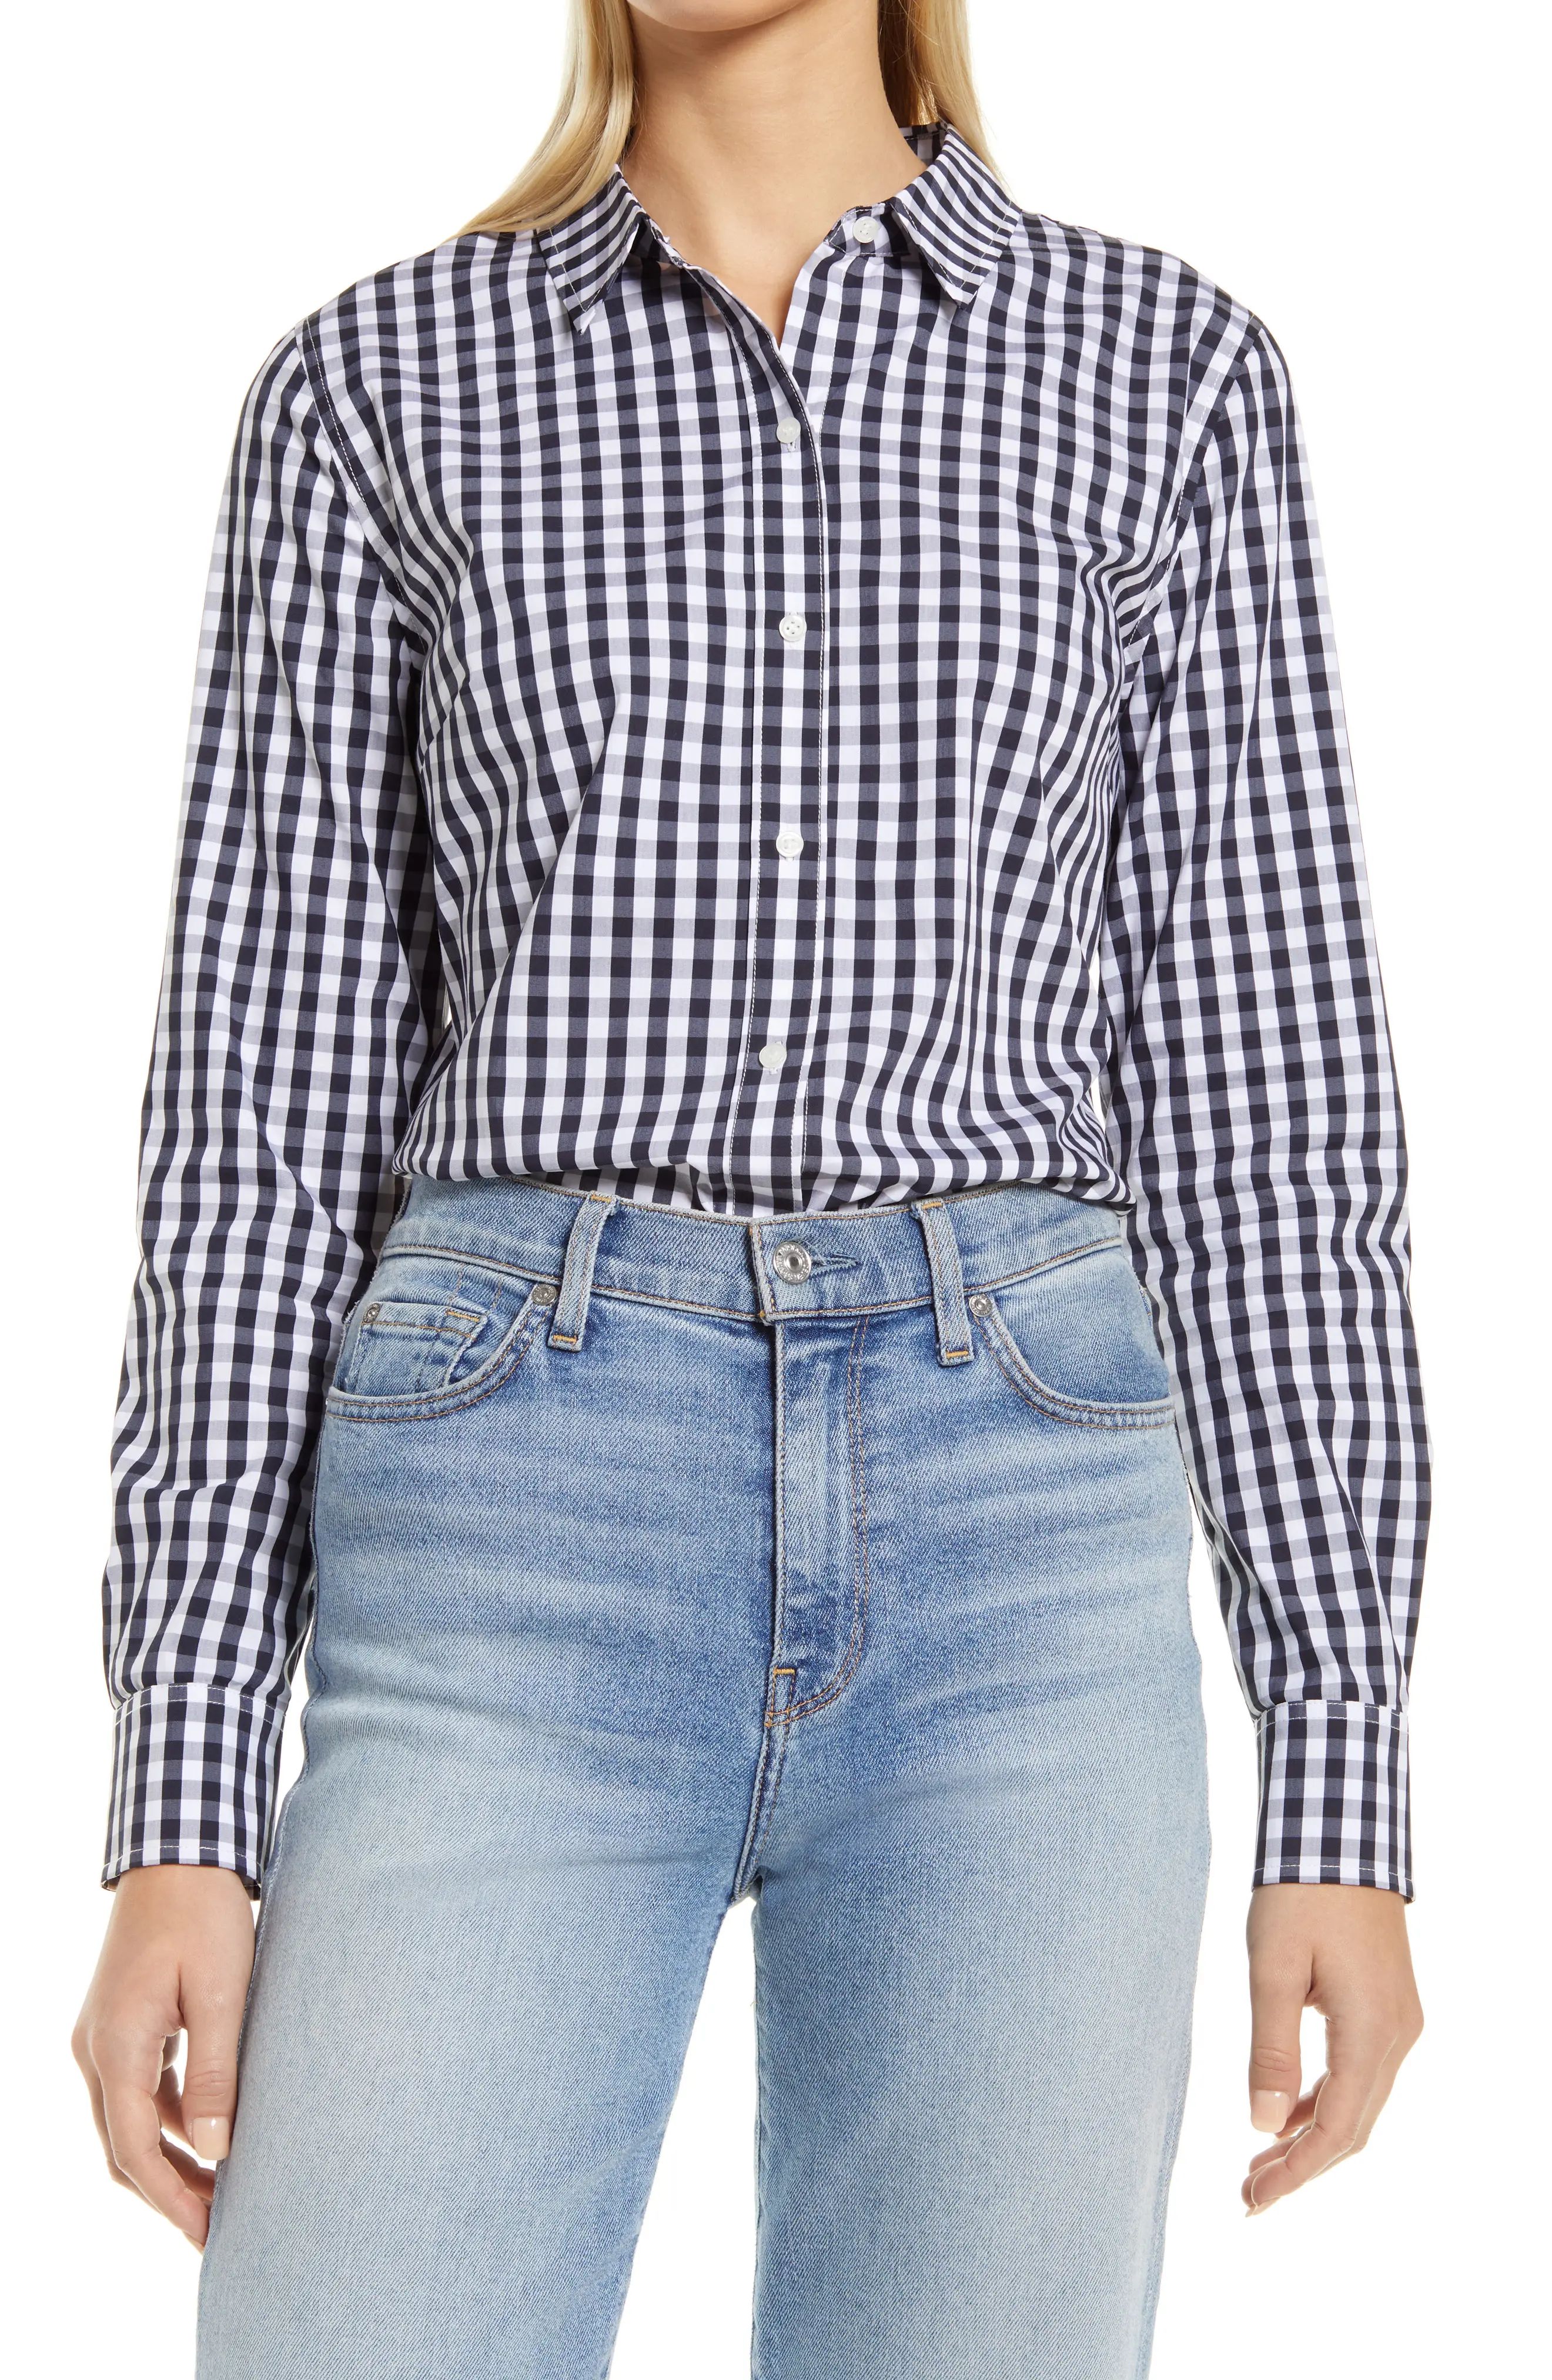 Halogen(R) Classic Poplin Button-Up Shirt, Size Small in Navy/White Gingham at Nordstrom | Nordstrom